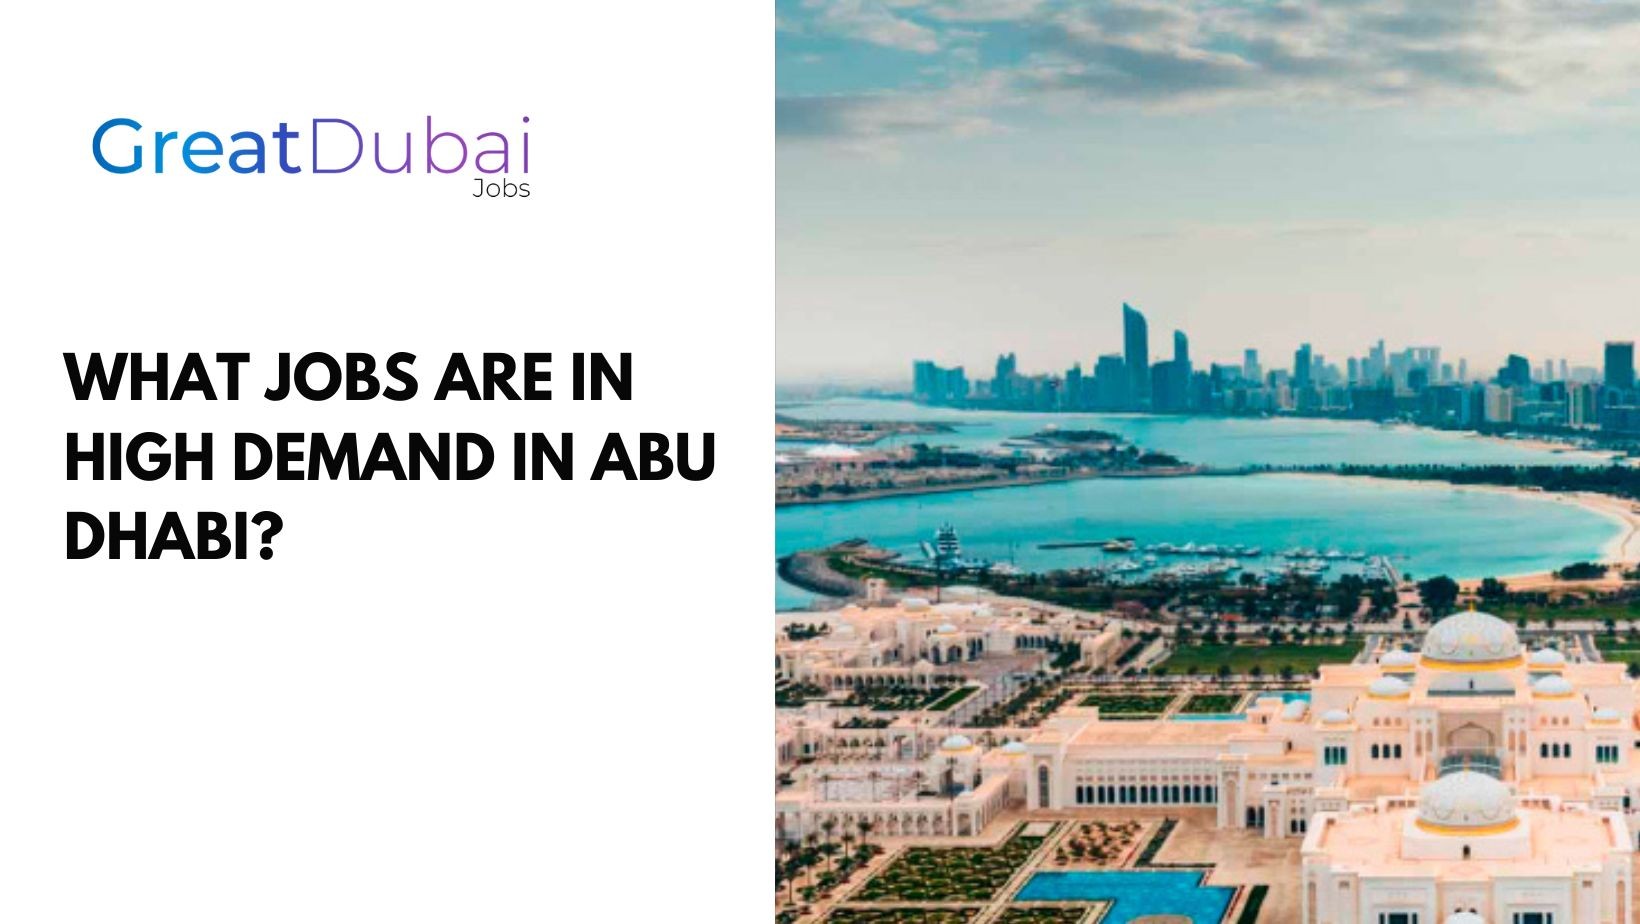 What Jobs are in High Demand in Abu Dhabi?